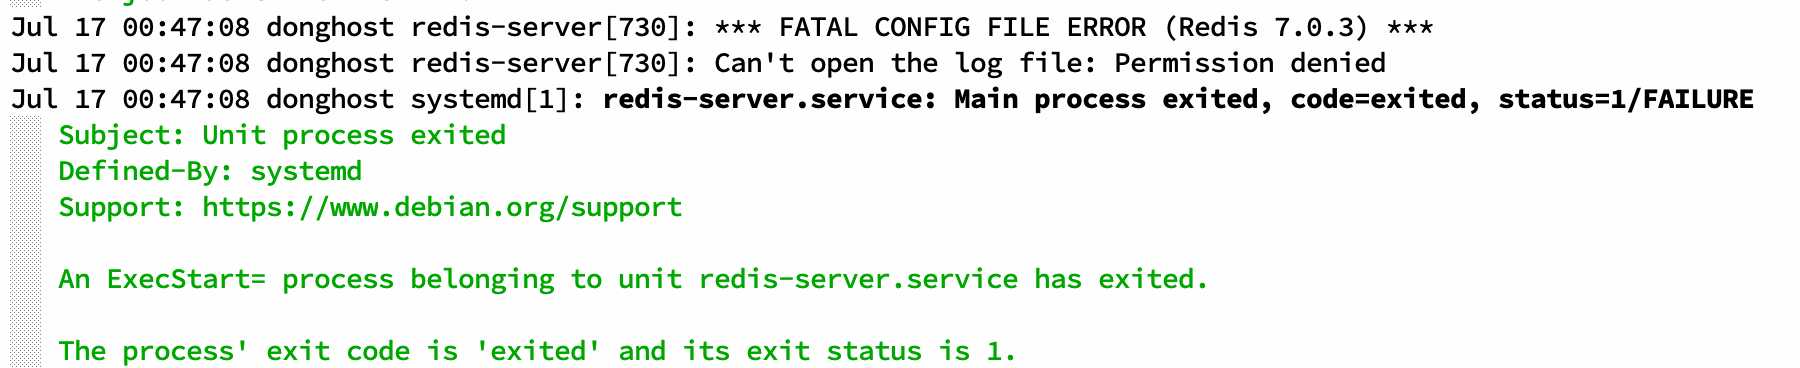 redis 启动失败：Can't open the log file: Permission denied